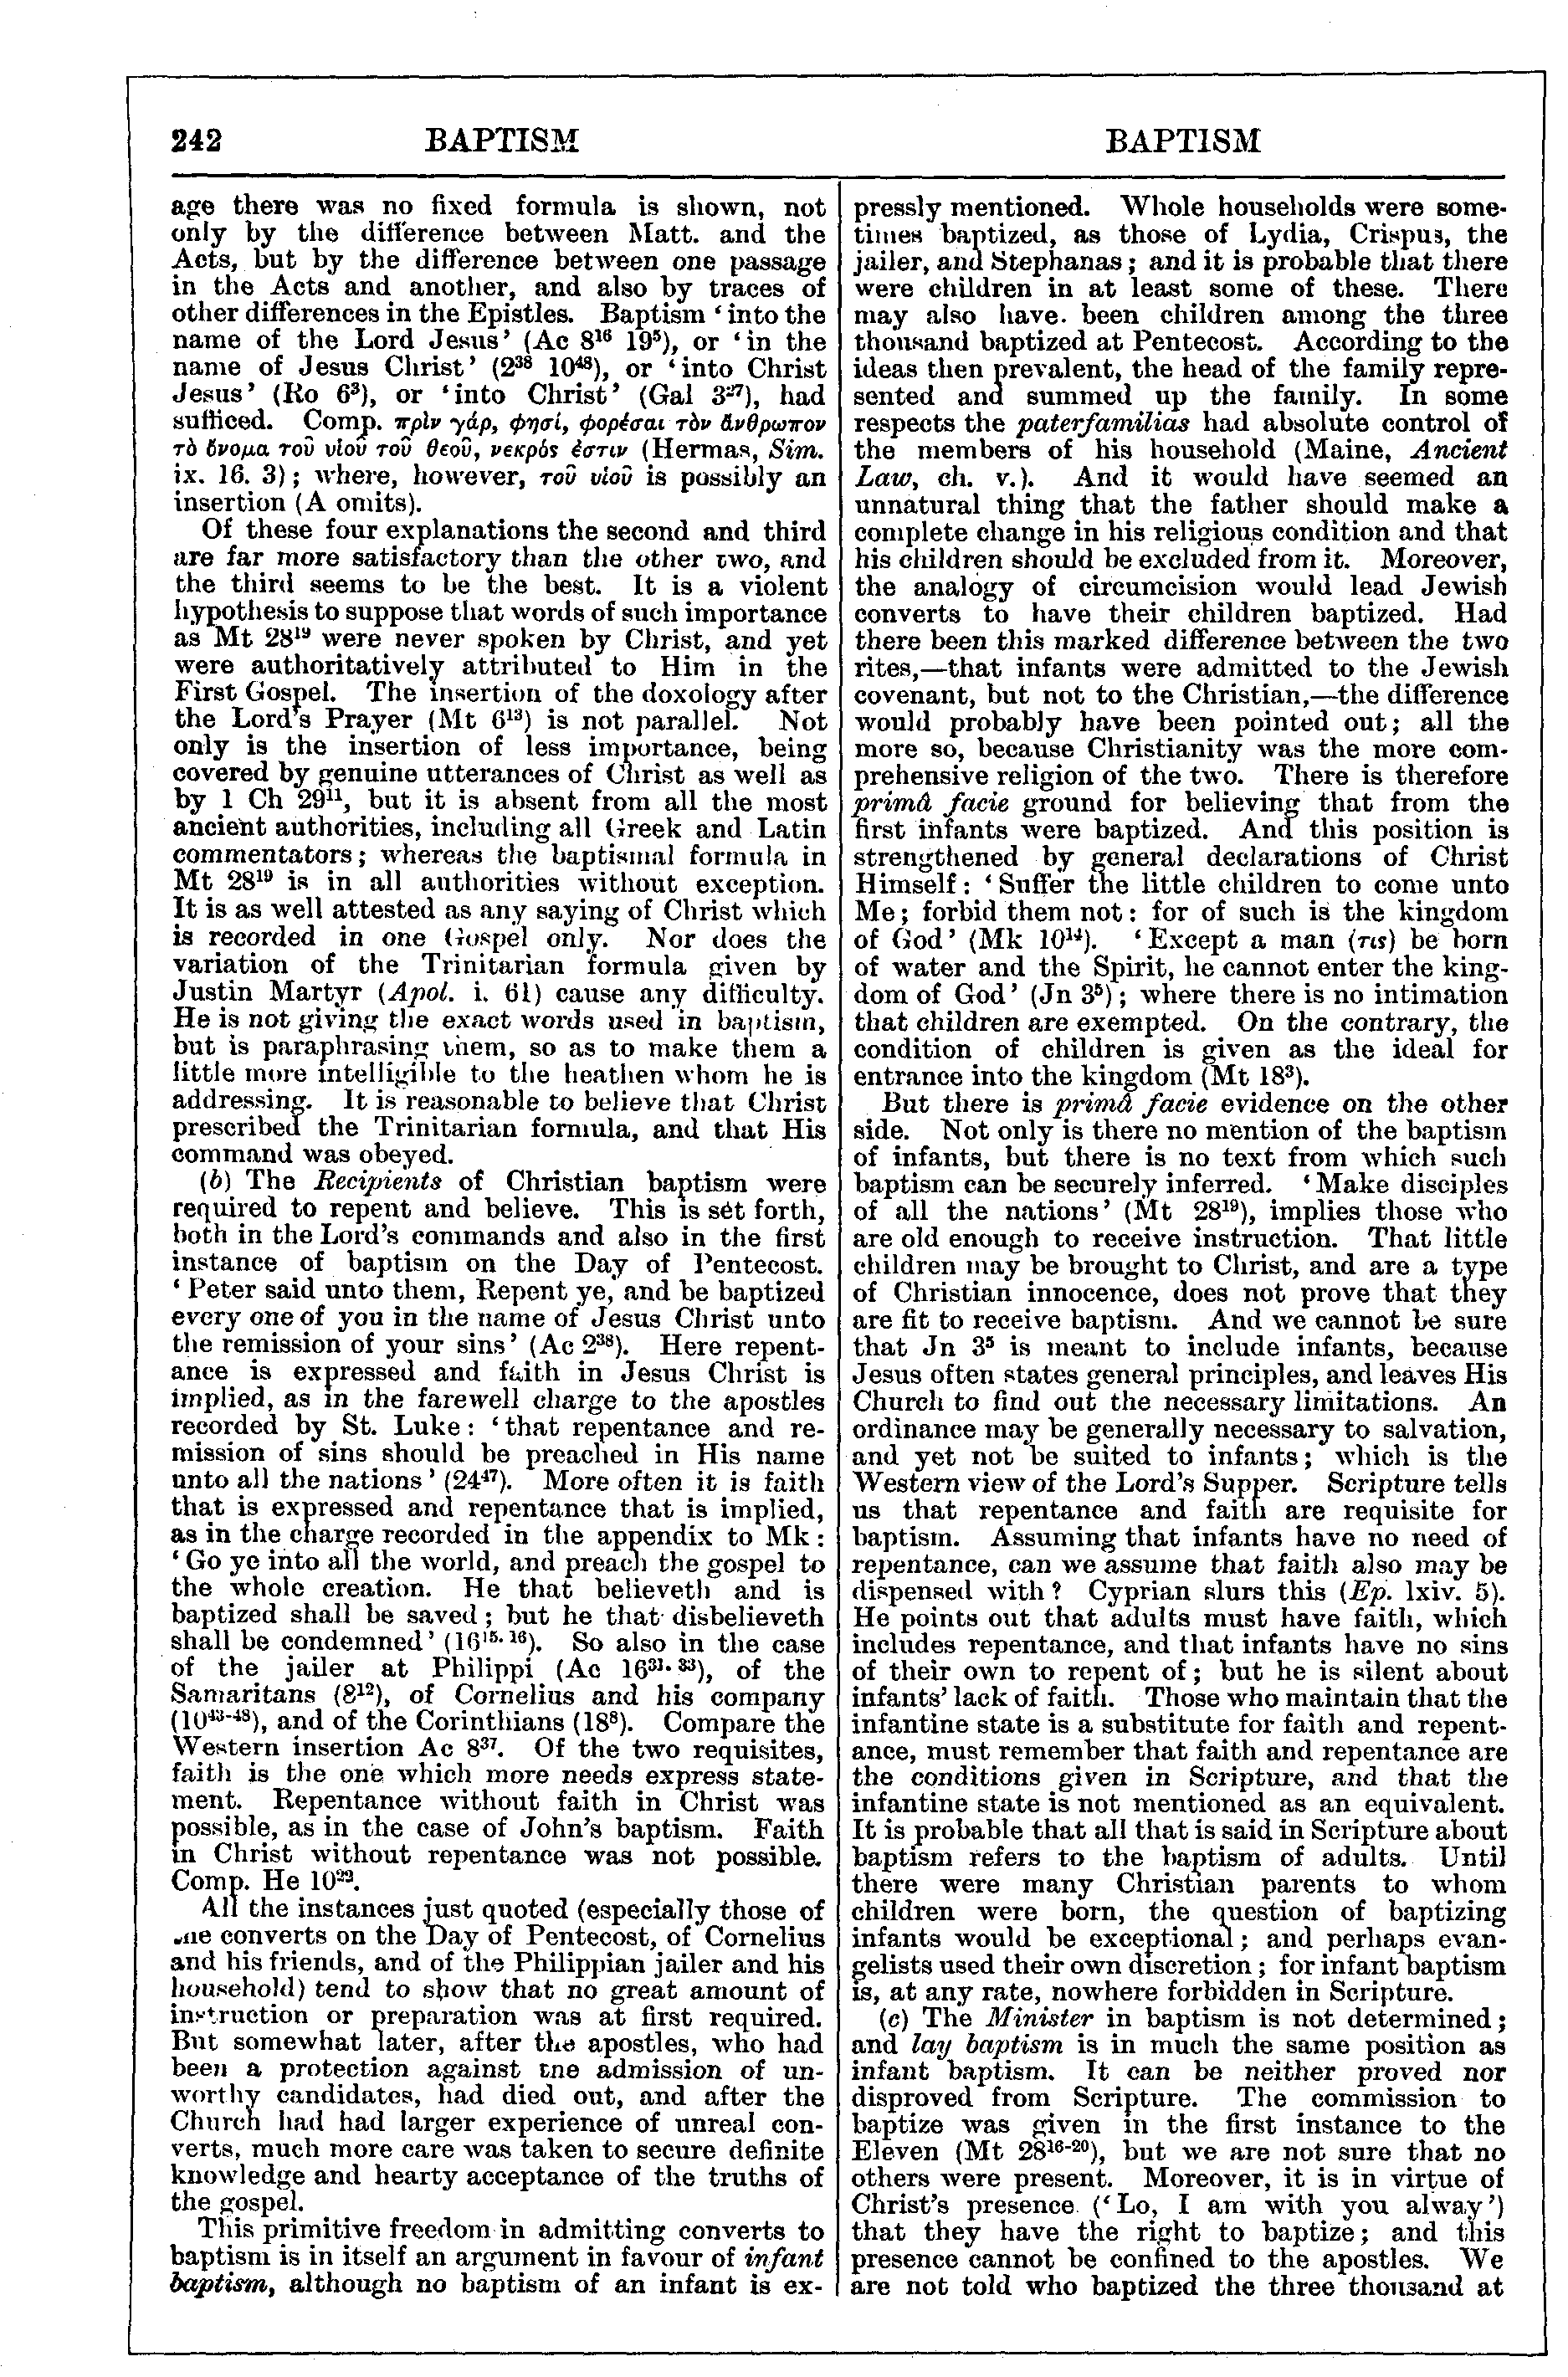 Image of page 242